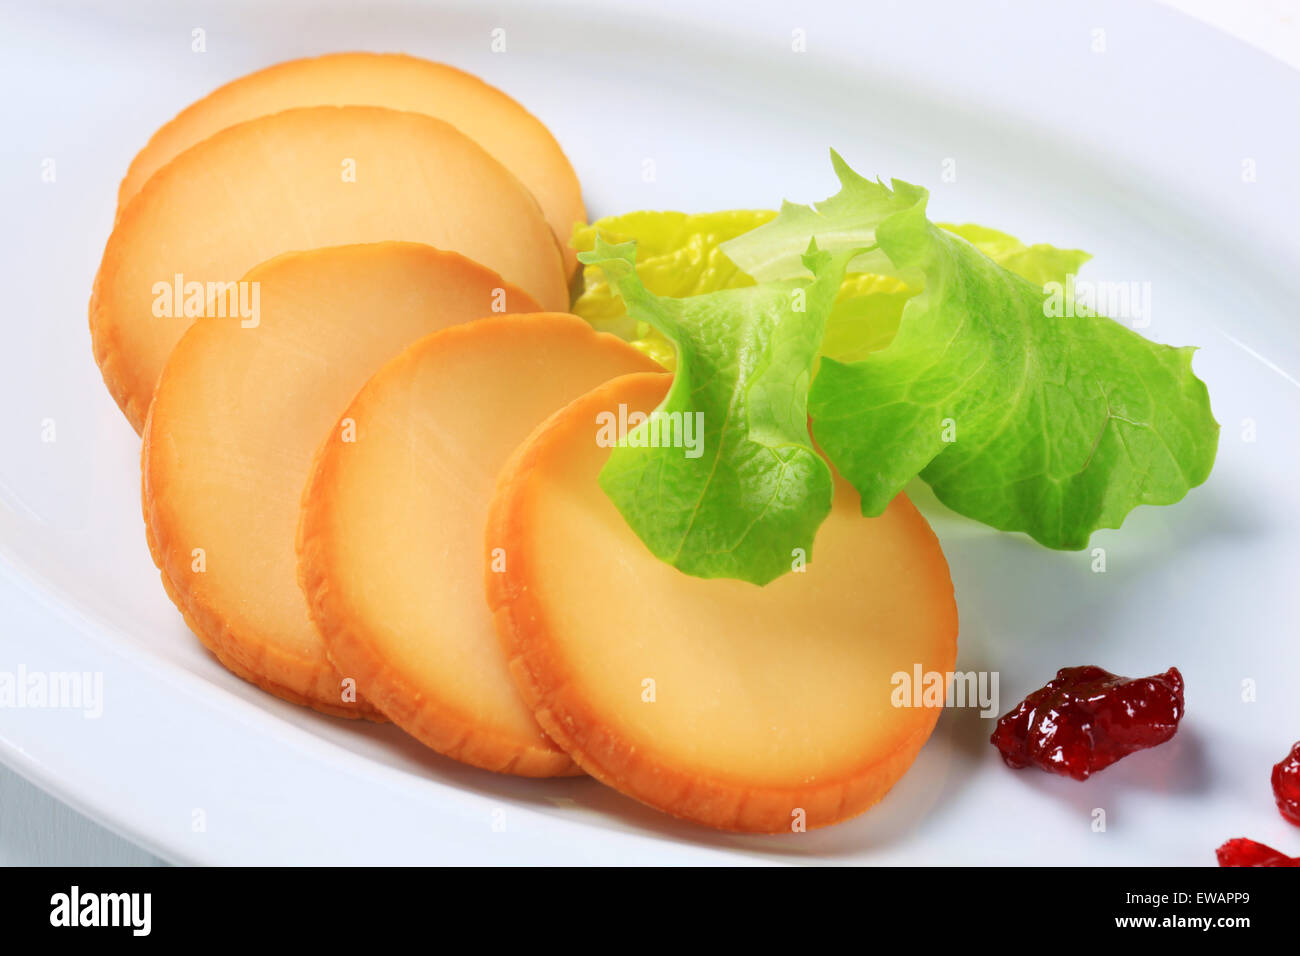 Slices of smoked cheese on plate Stock Photo